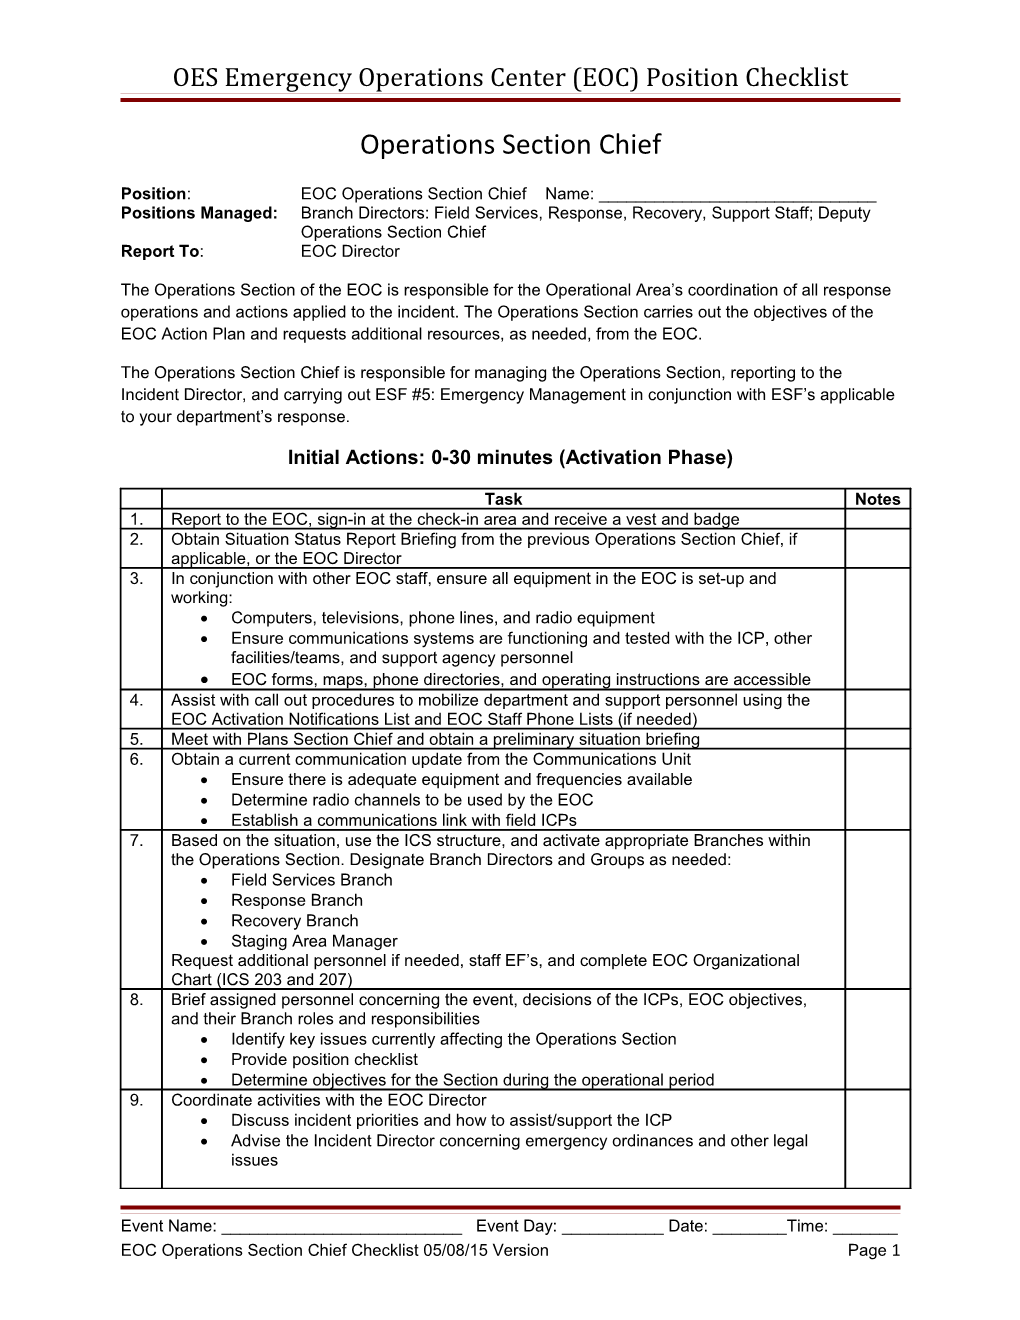 CCSF Department Operations Center Position Checklist